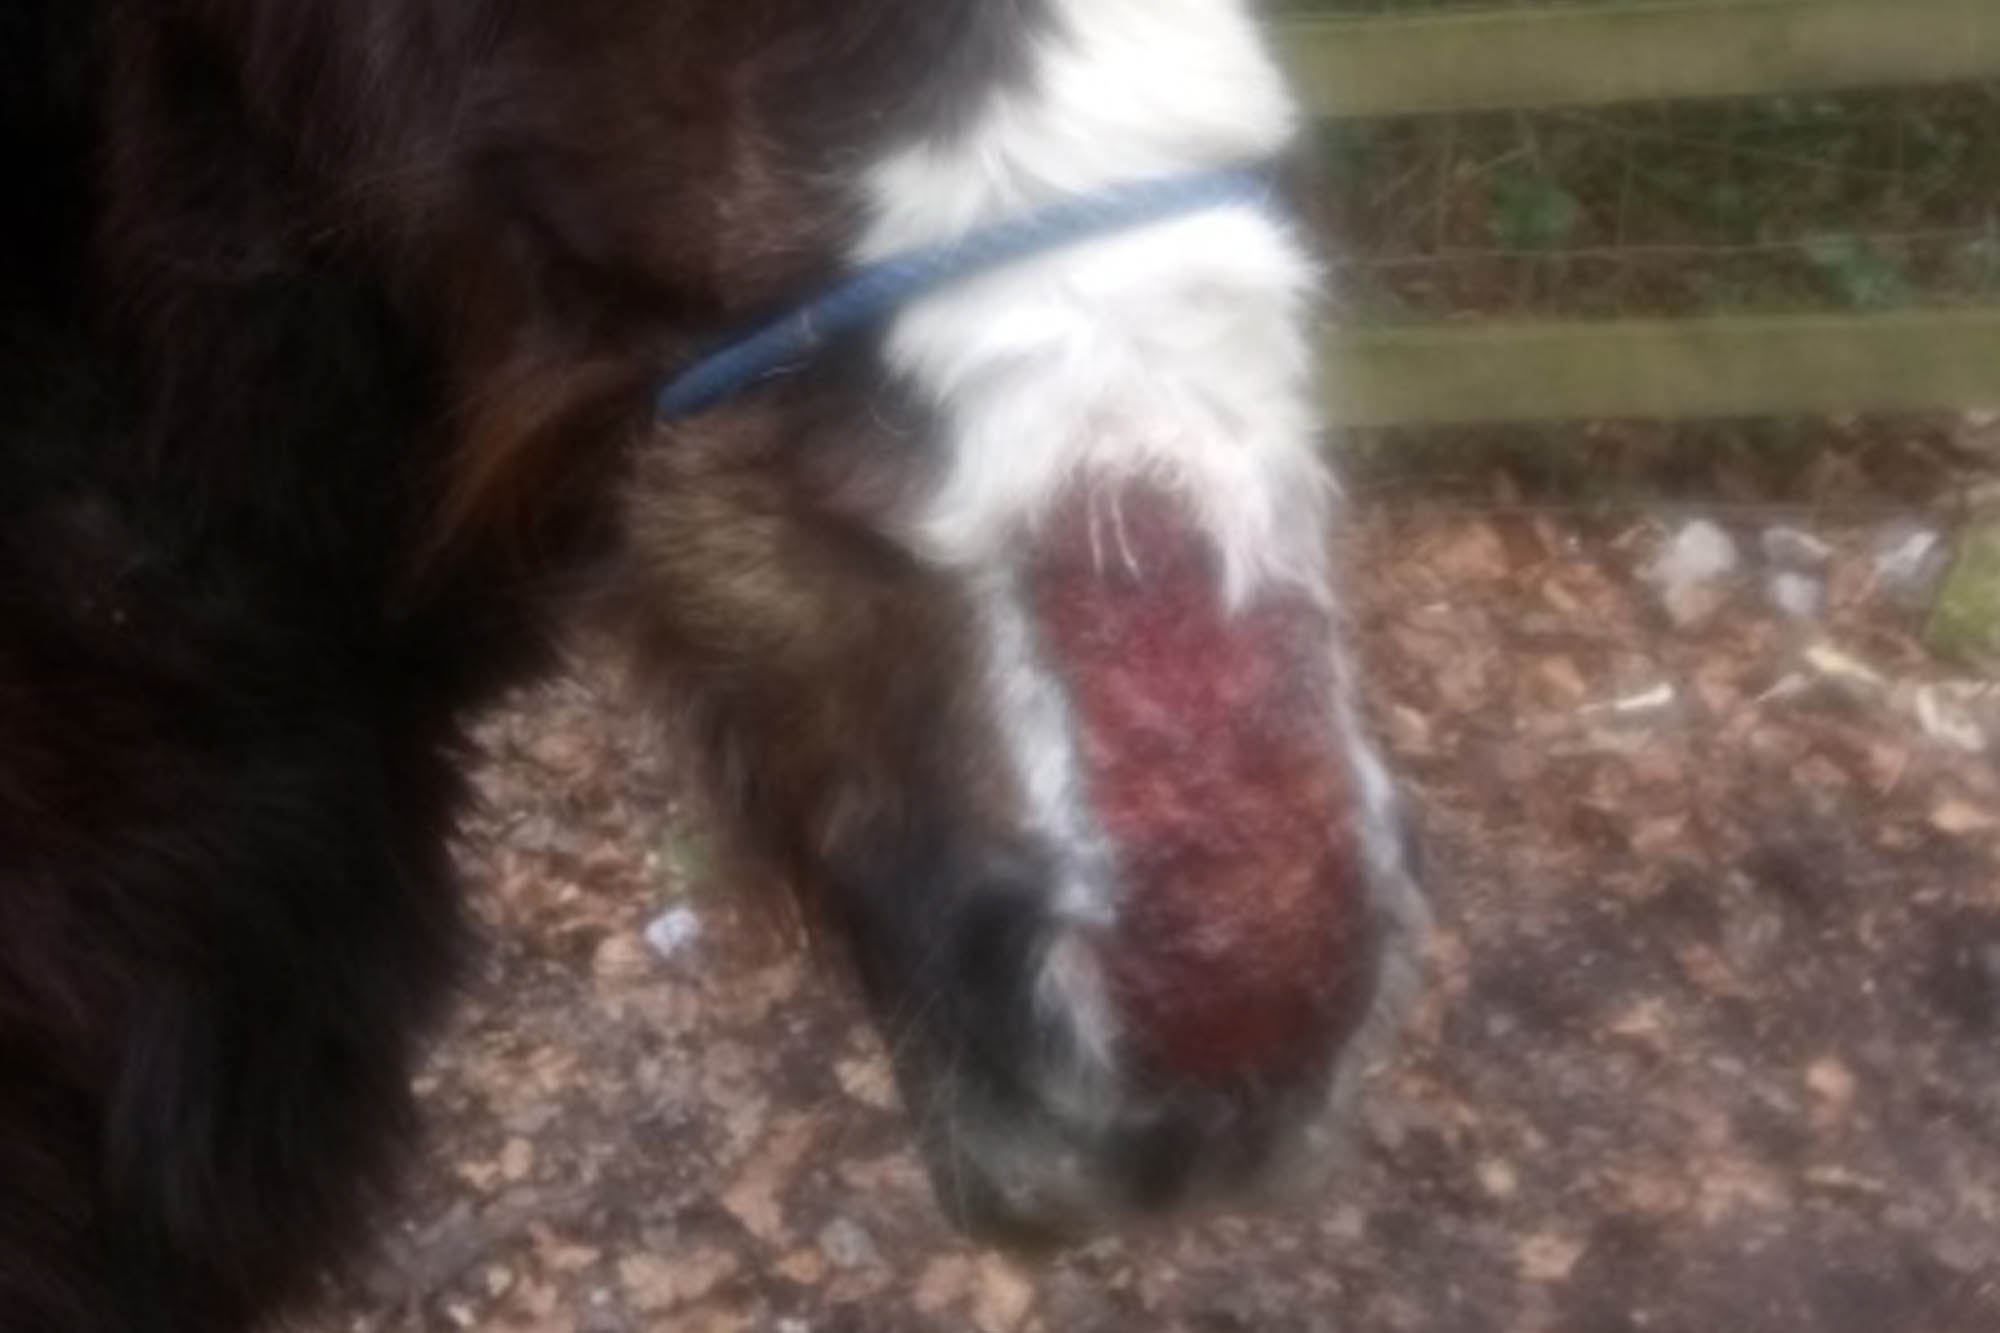 Call for information after pony dumped with horrific injuries in New Forest